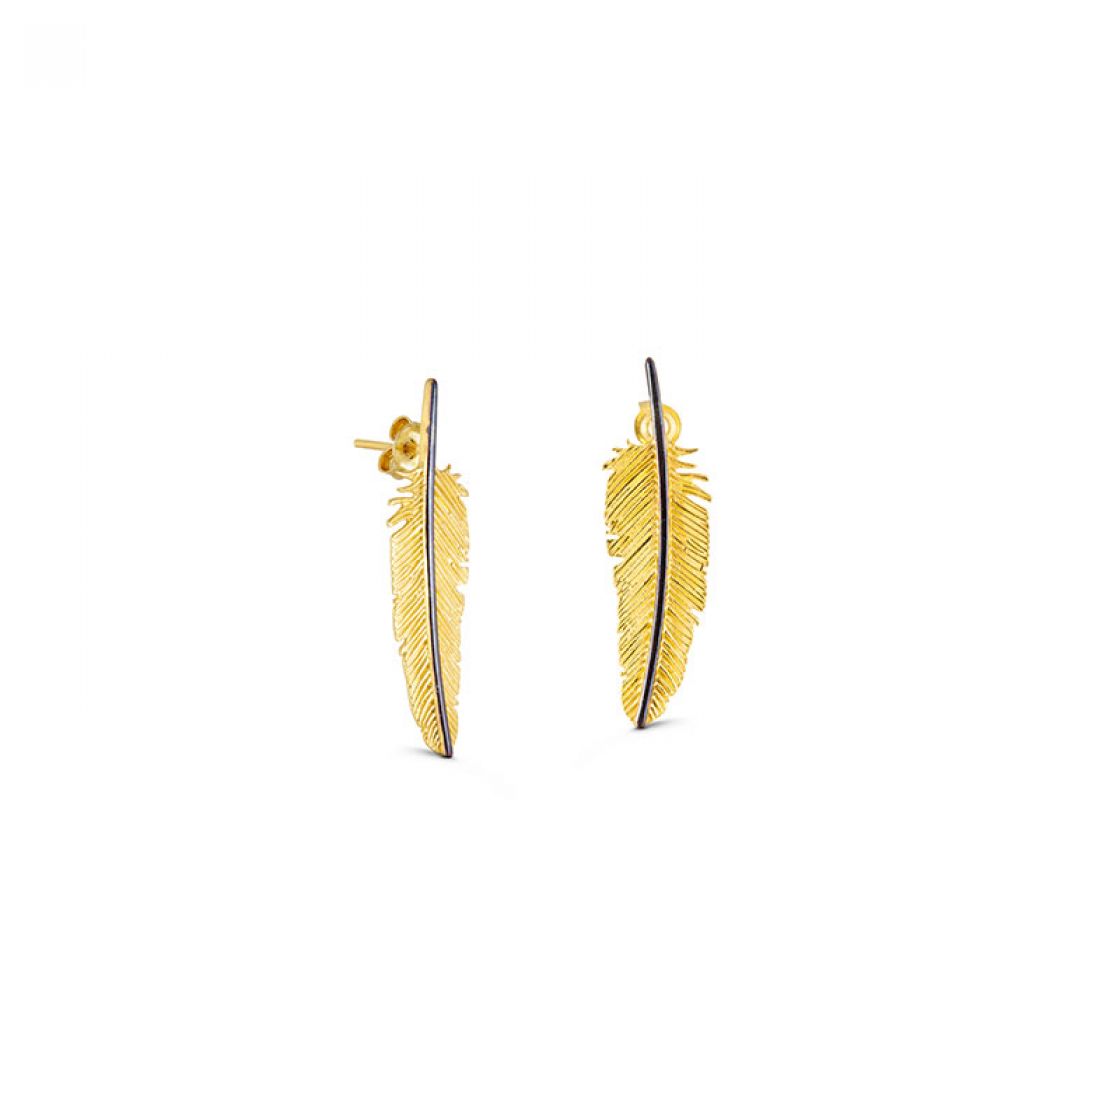 Elegant gold feather earrings, with beautiful details, for everyday wear.